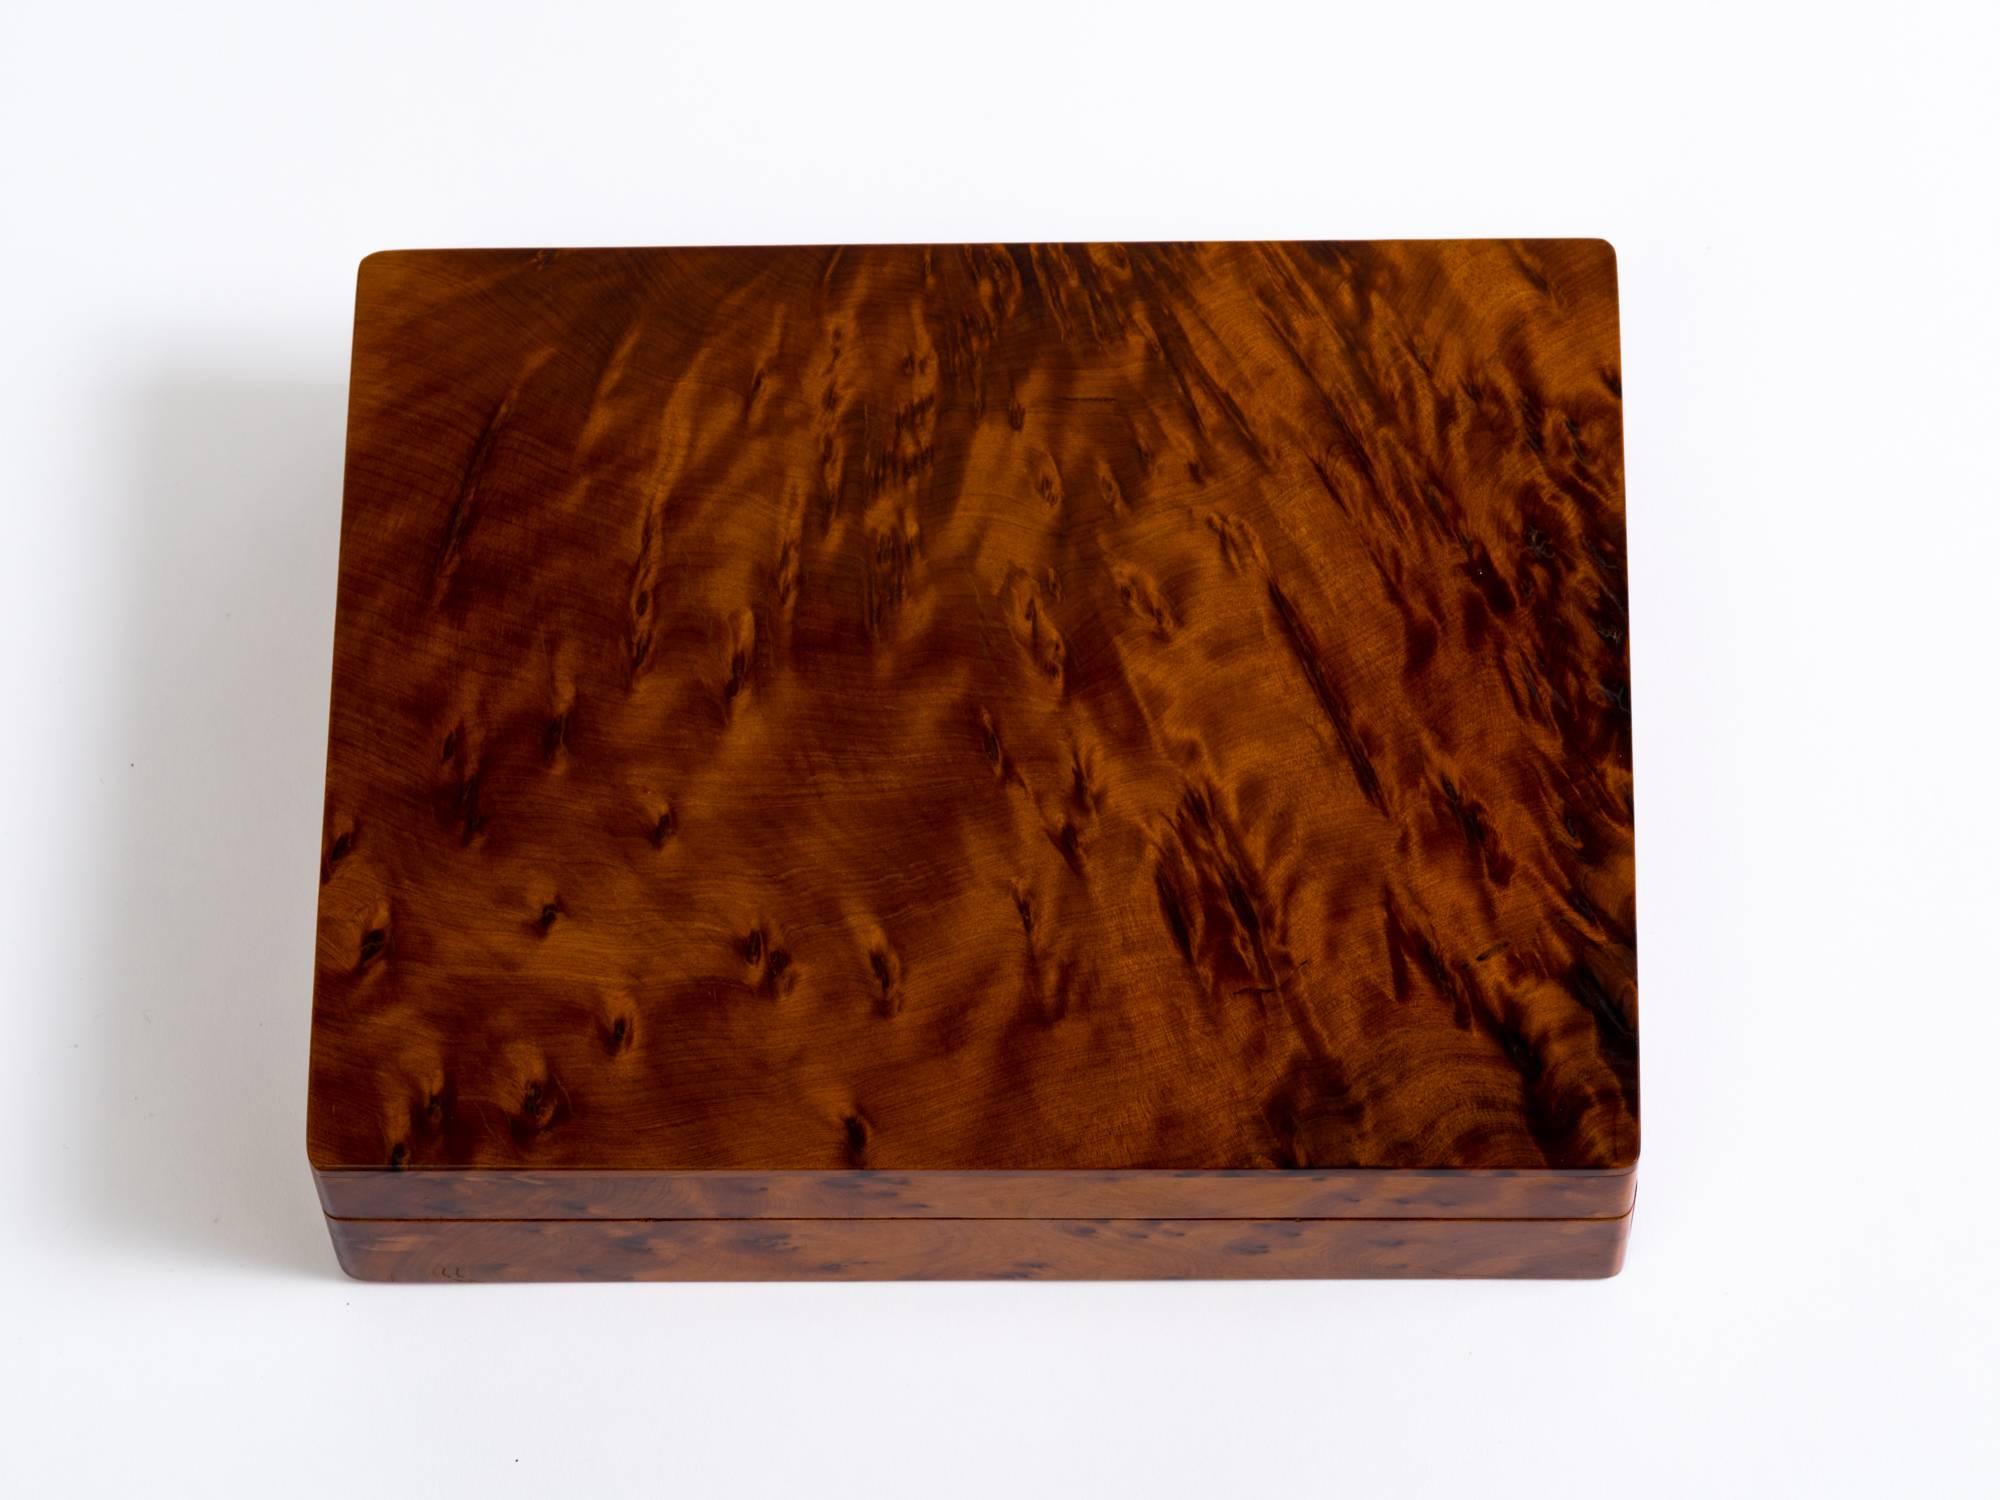 Rectangular Italian Art Deco cigar or jewelry box is crafted in a beautiful grain burl wood with a soft, buttery texture.